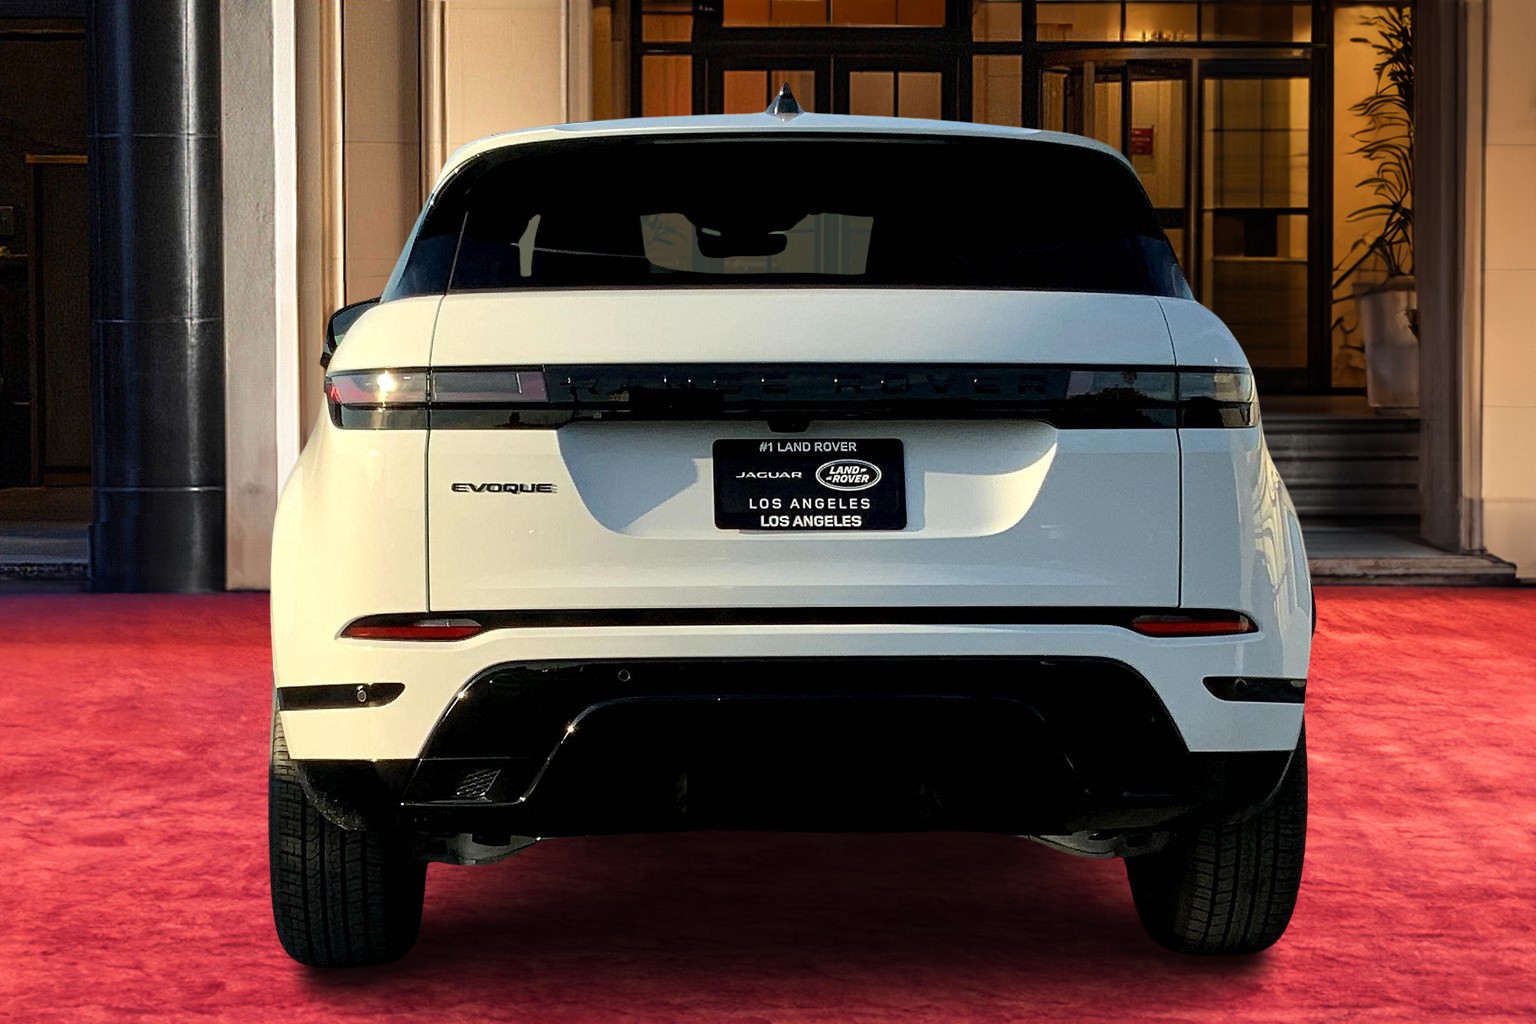 Range Rover Evoque LWB Stretches Out Ahead Of Its Big Debut In China